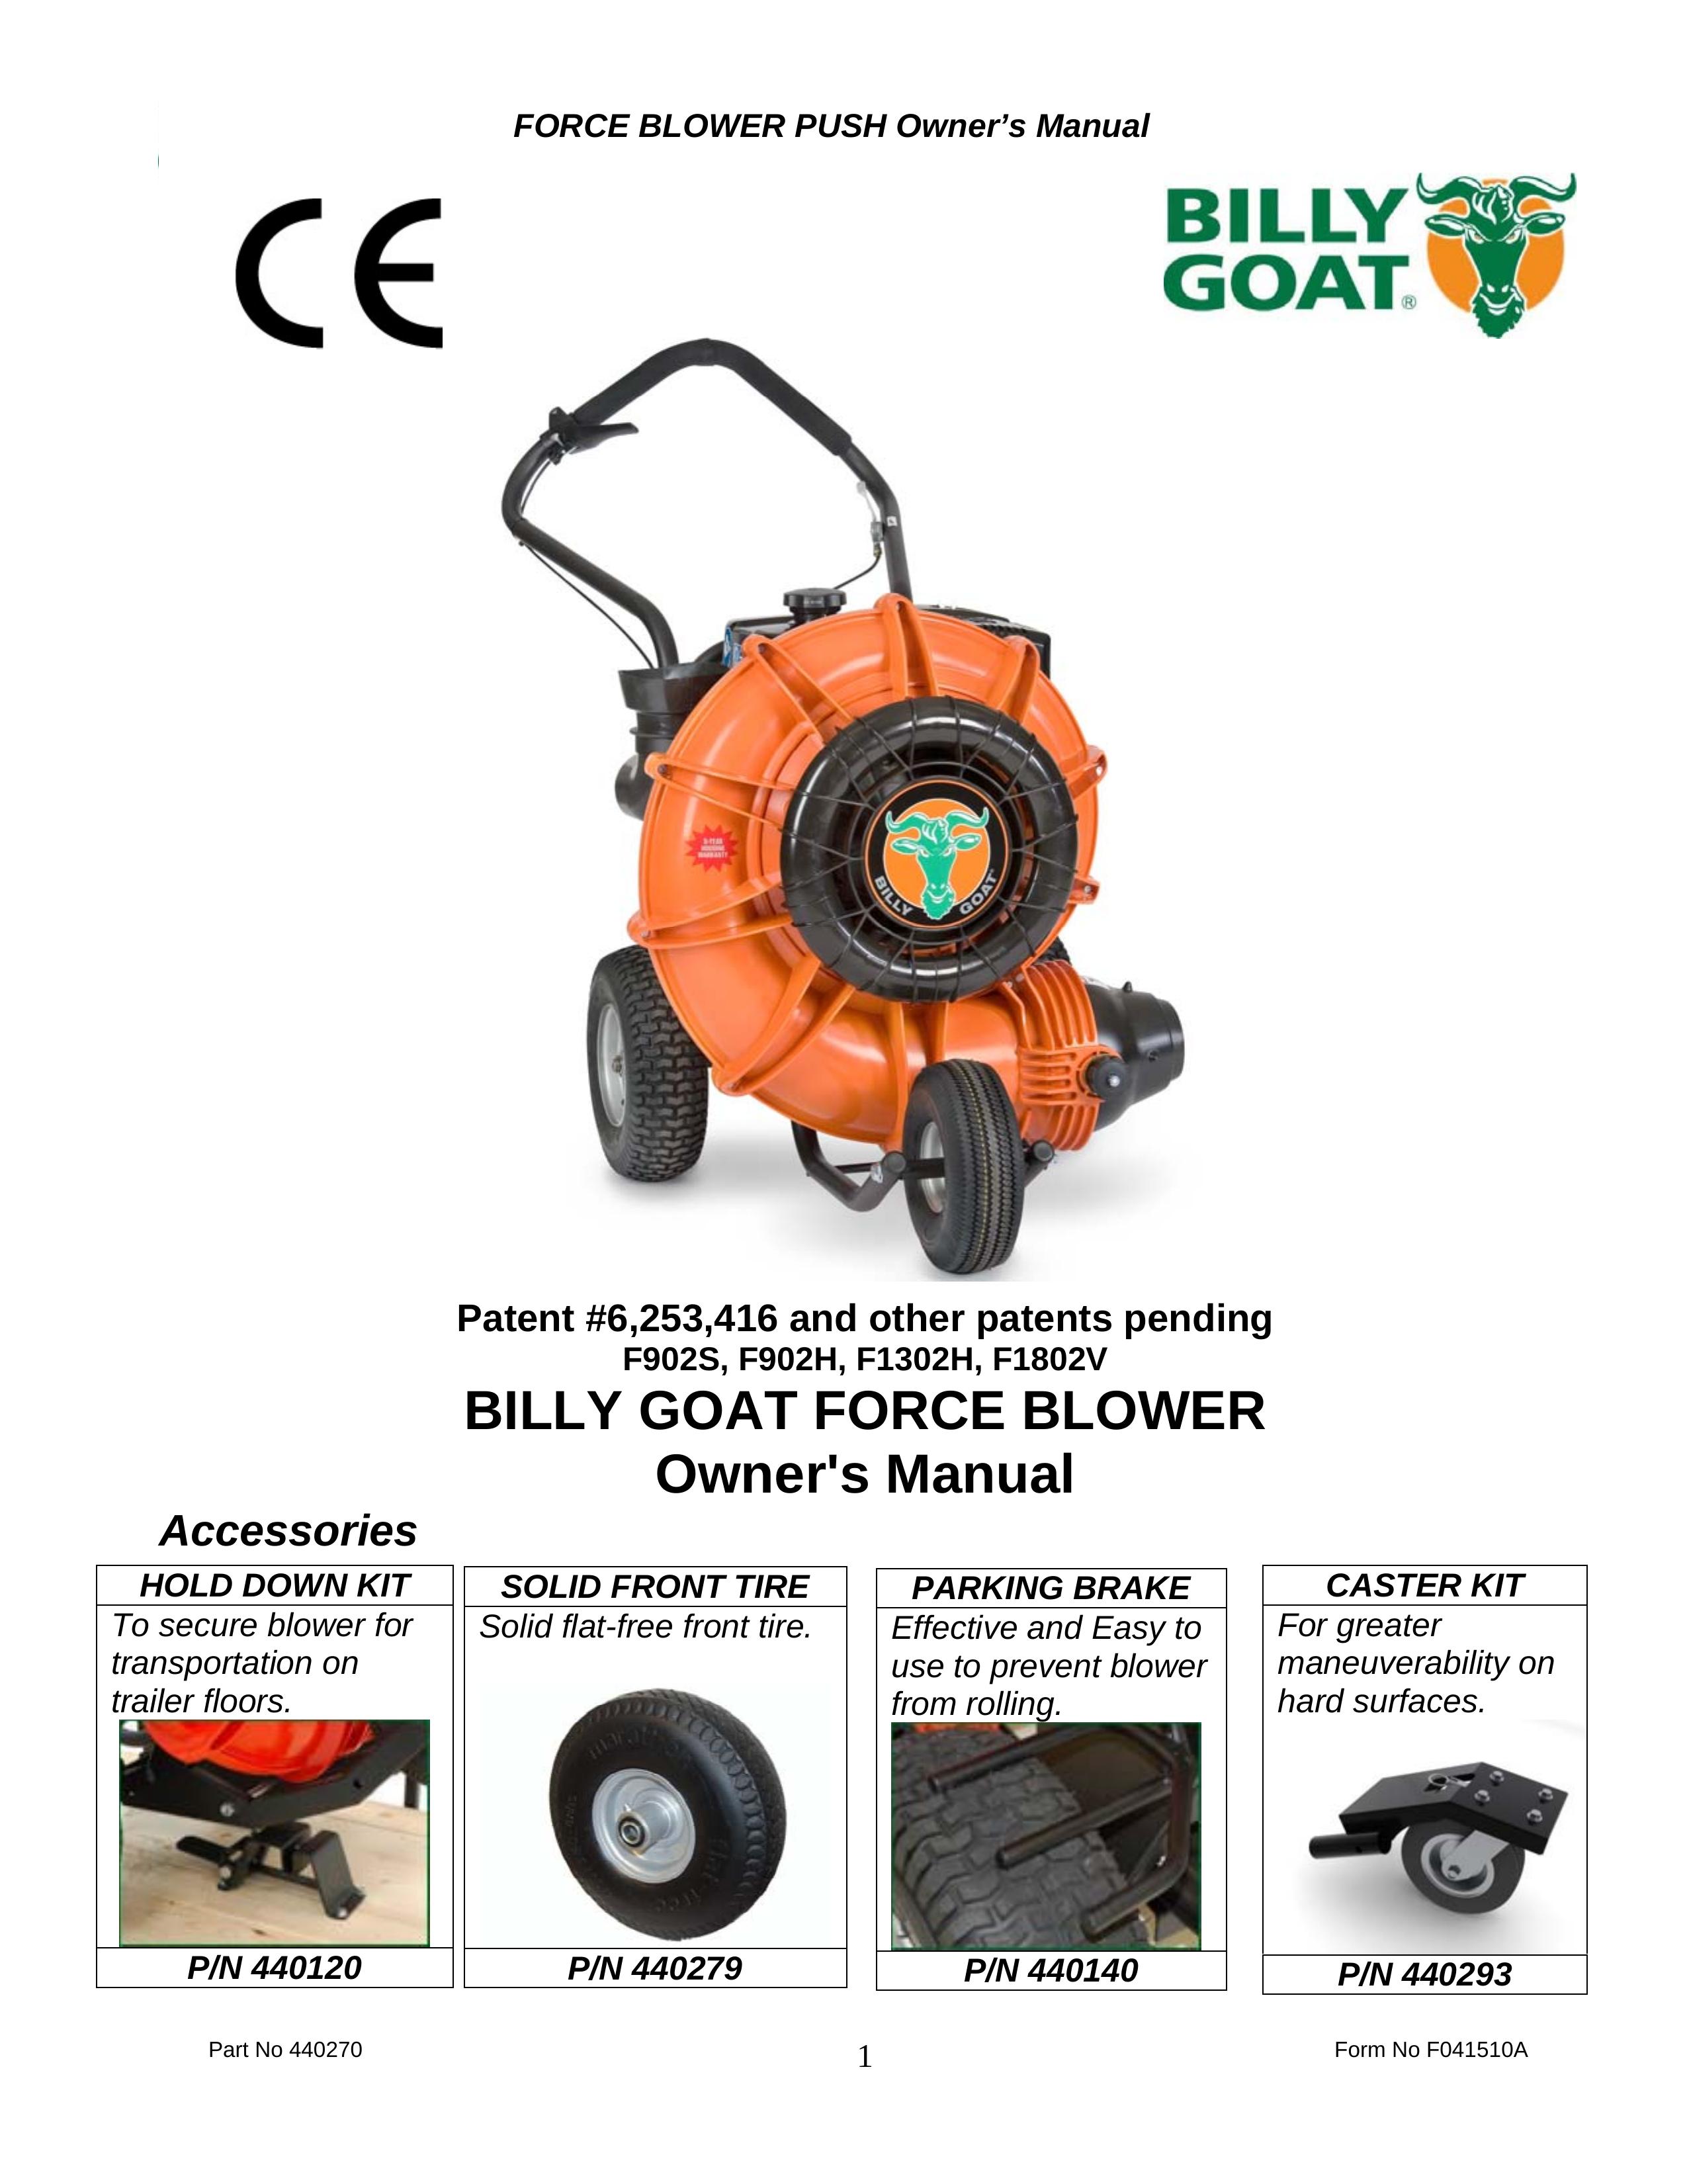 Billy Goat F1802V Blower User Manual (Page 1)